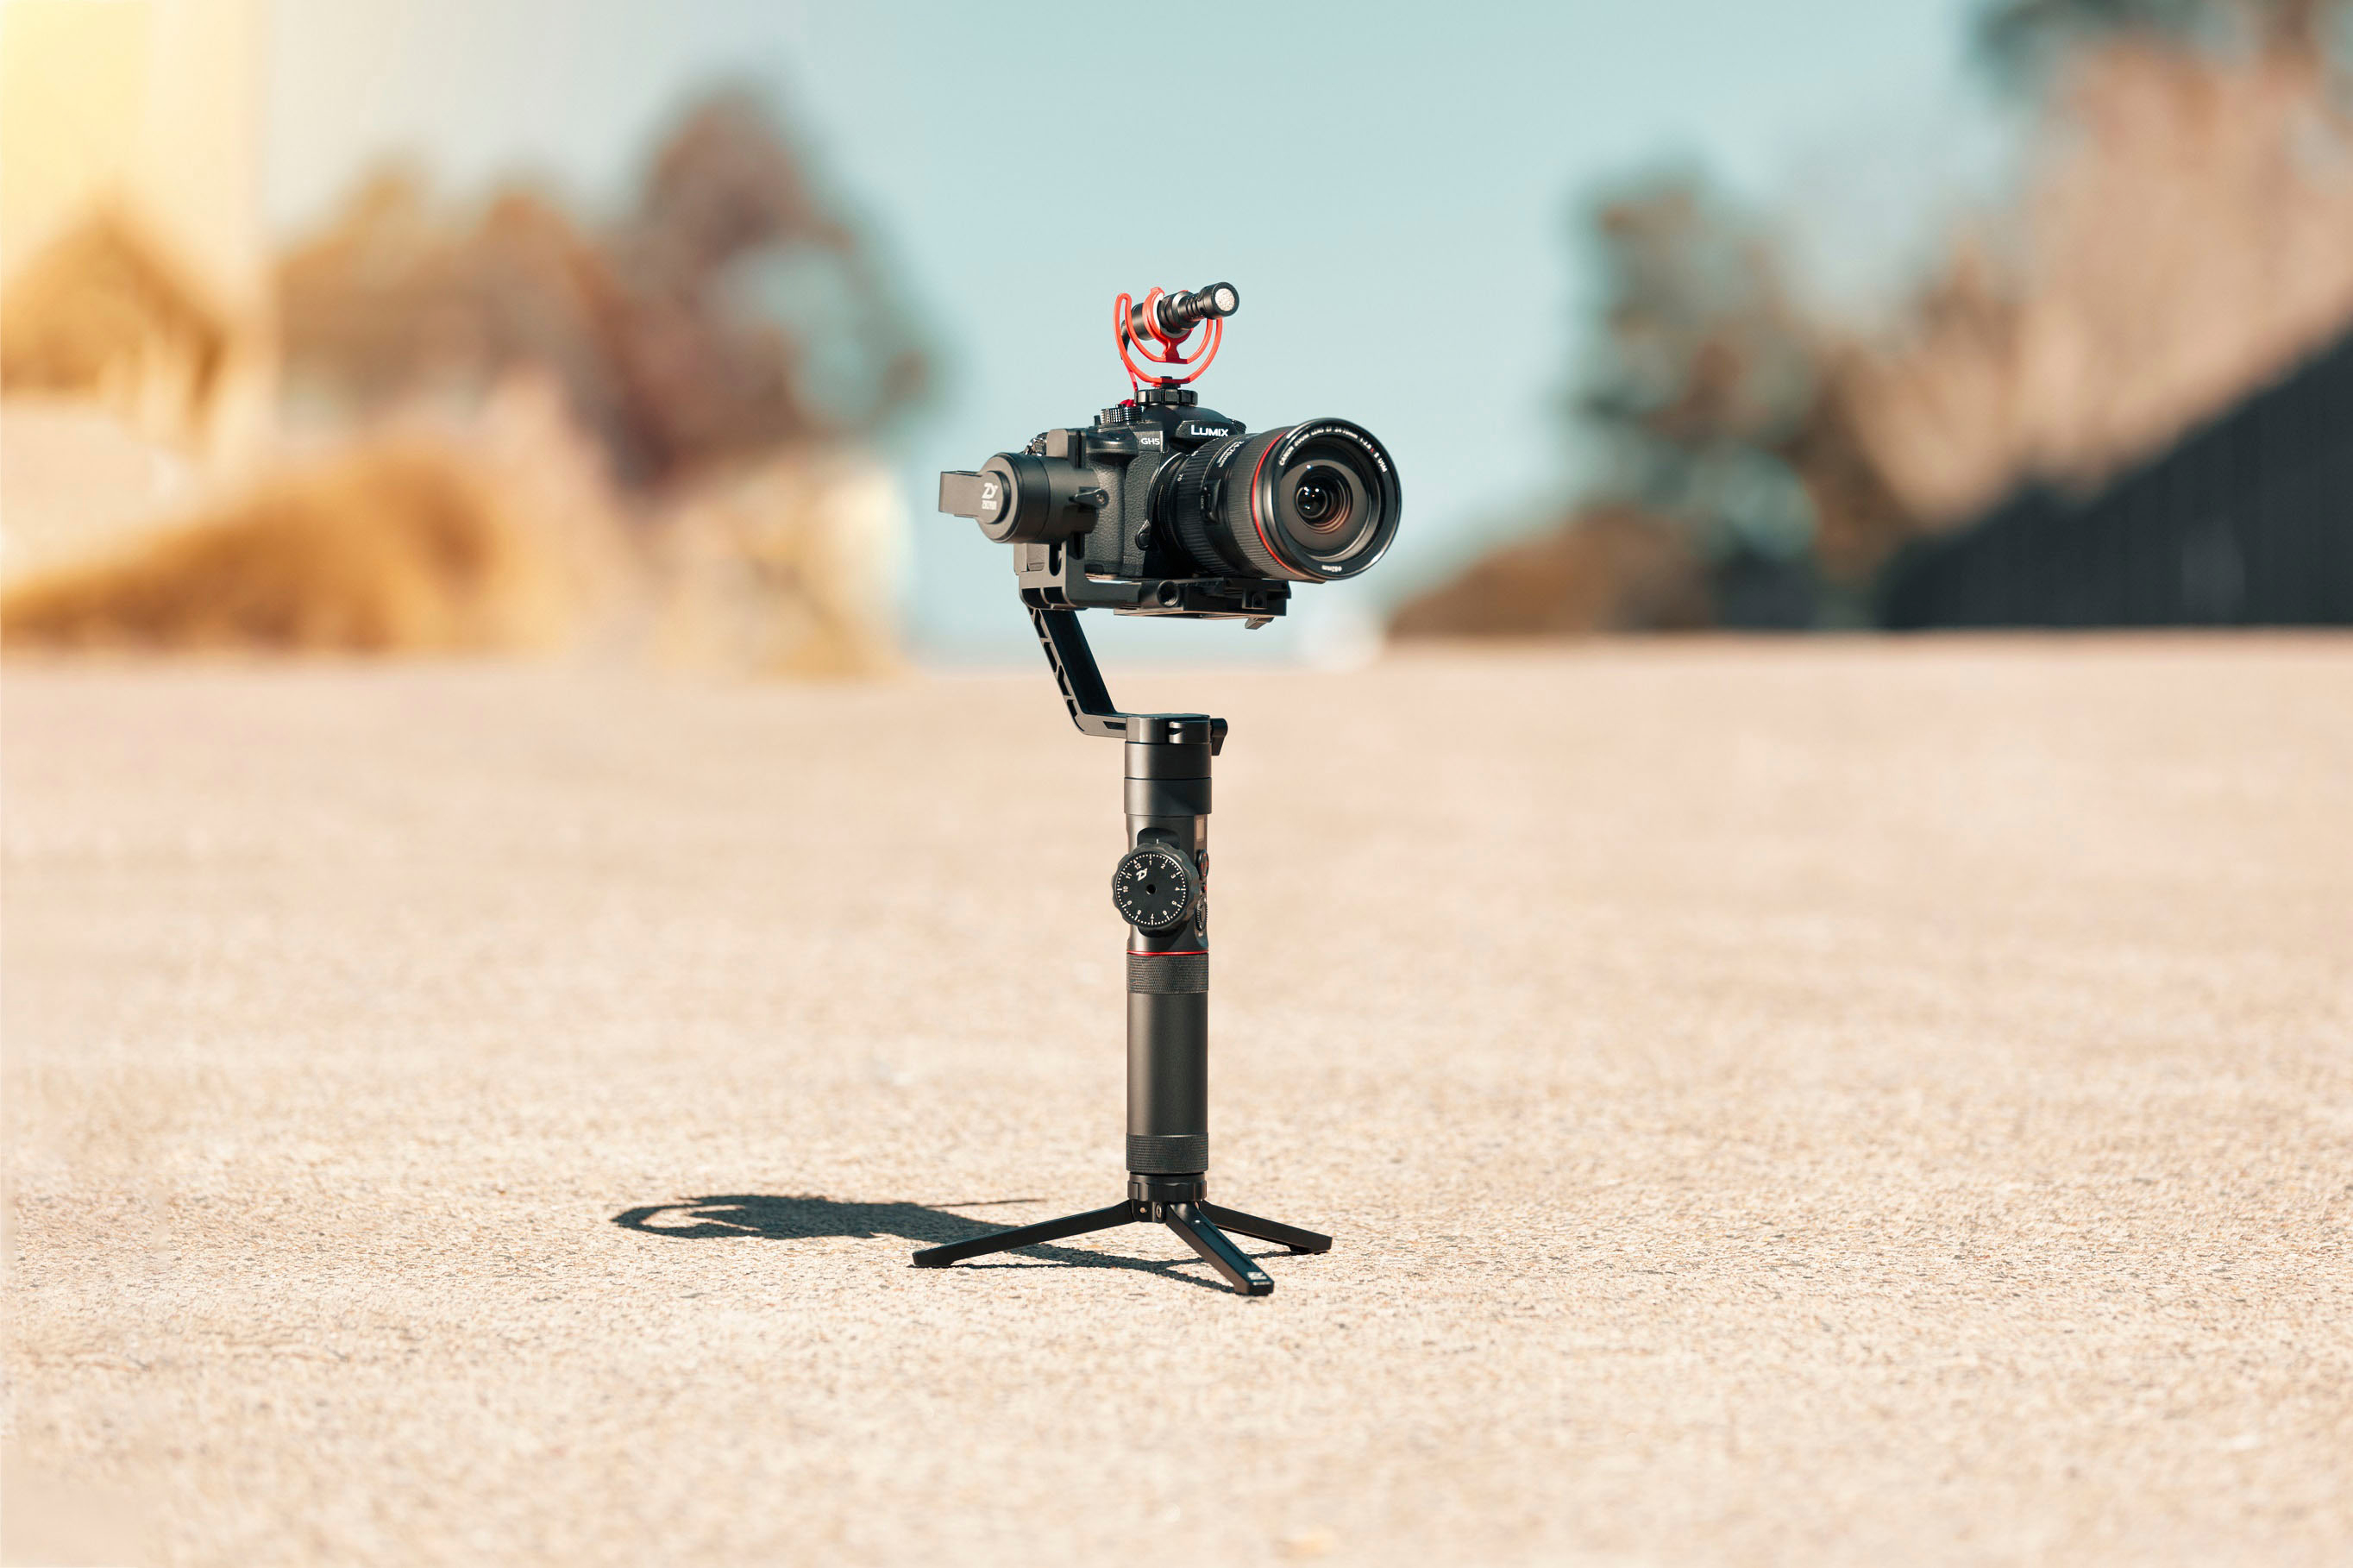 Rode VideoMicro Compact On-Camera Microphone with Red Lyre